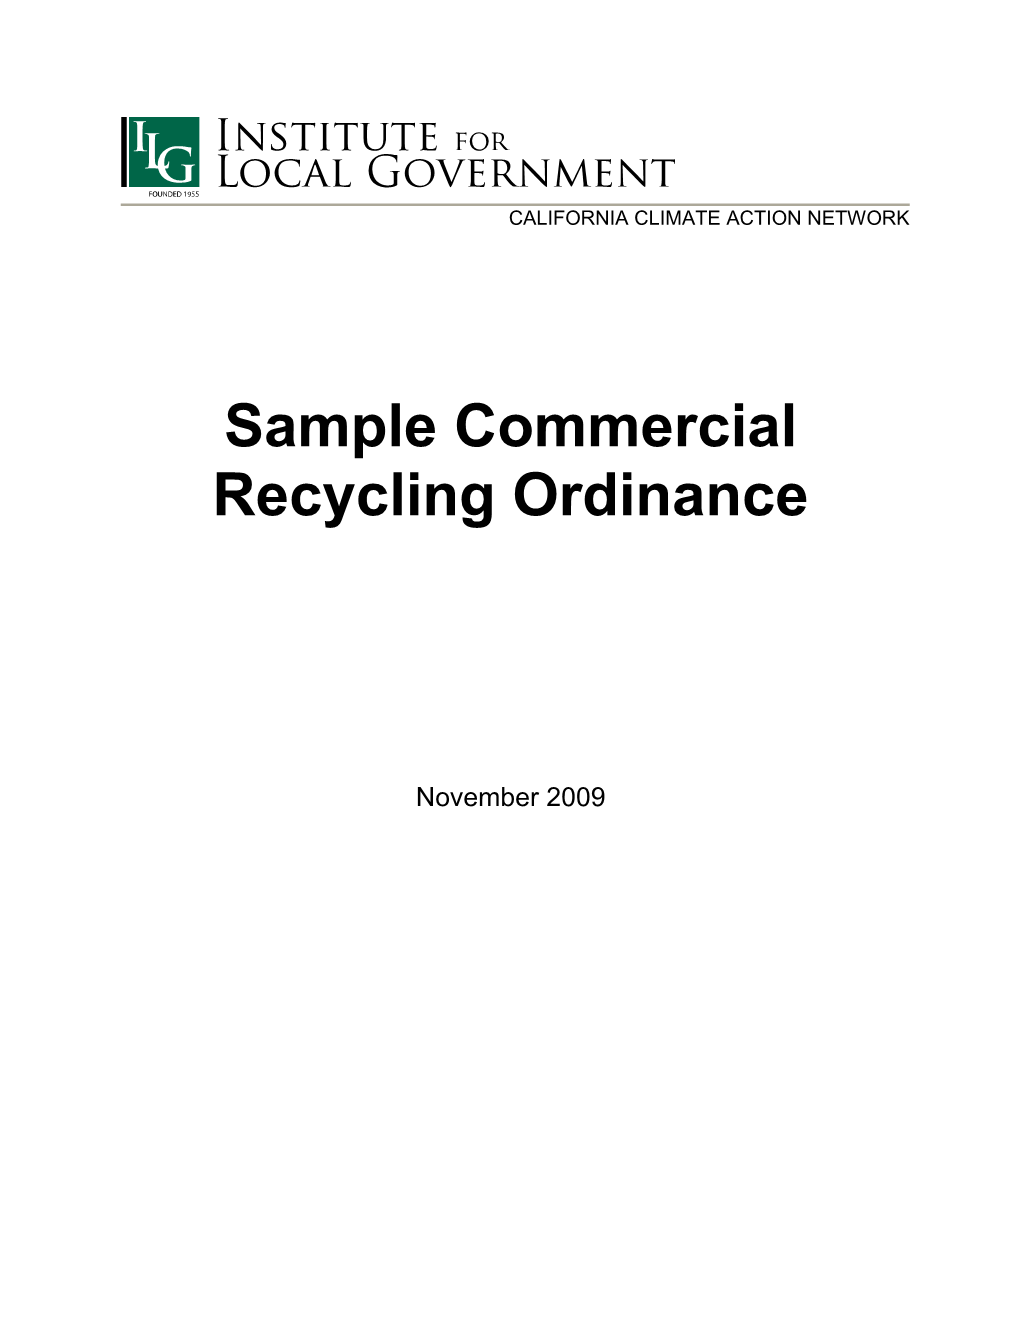 Sample Commercial Recycling Ordinance